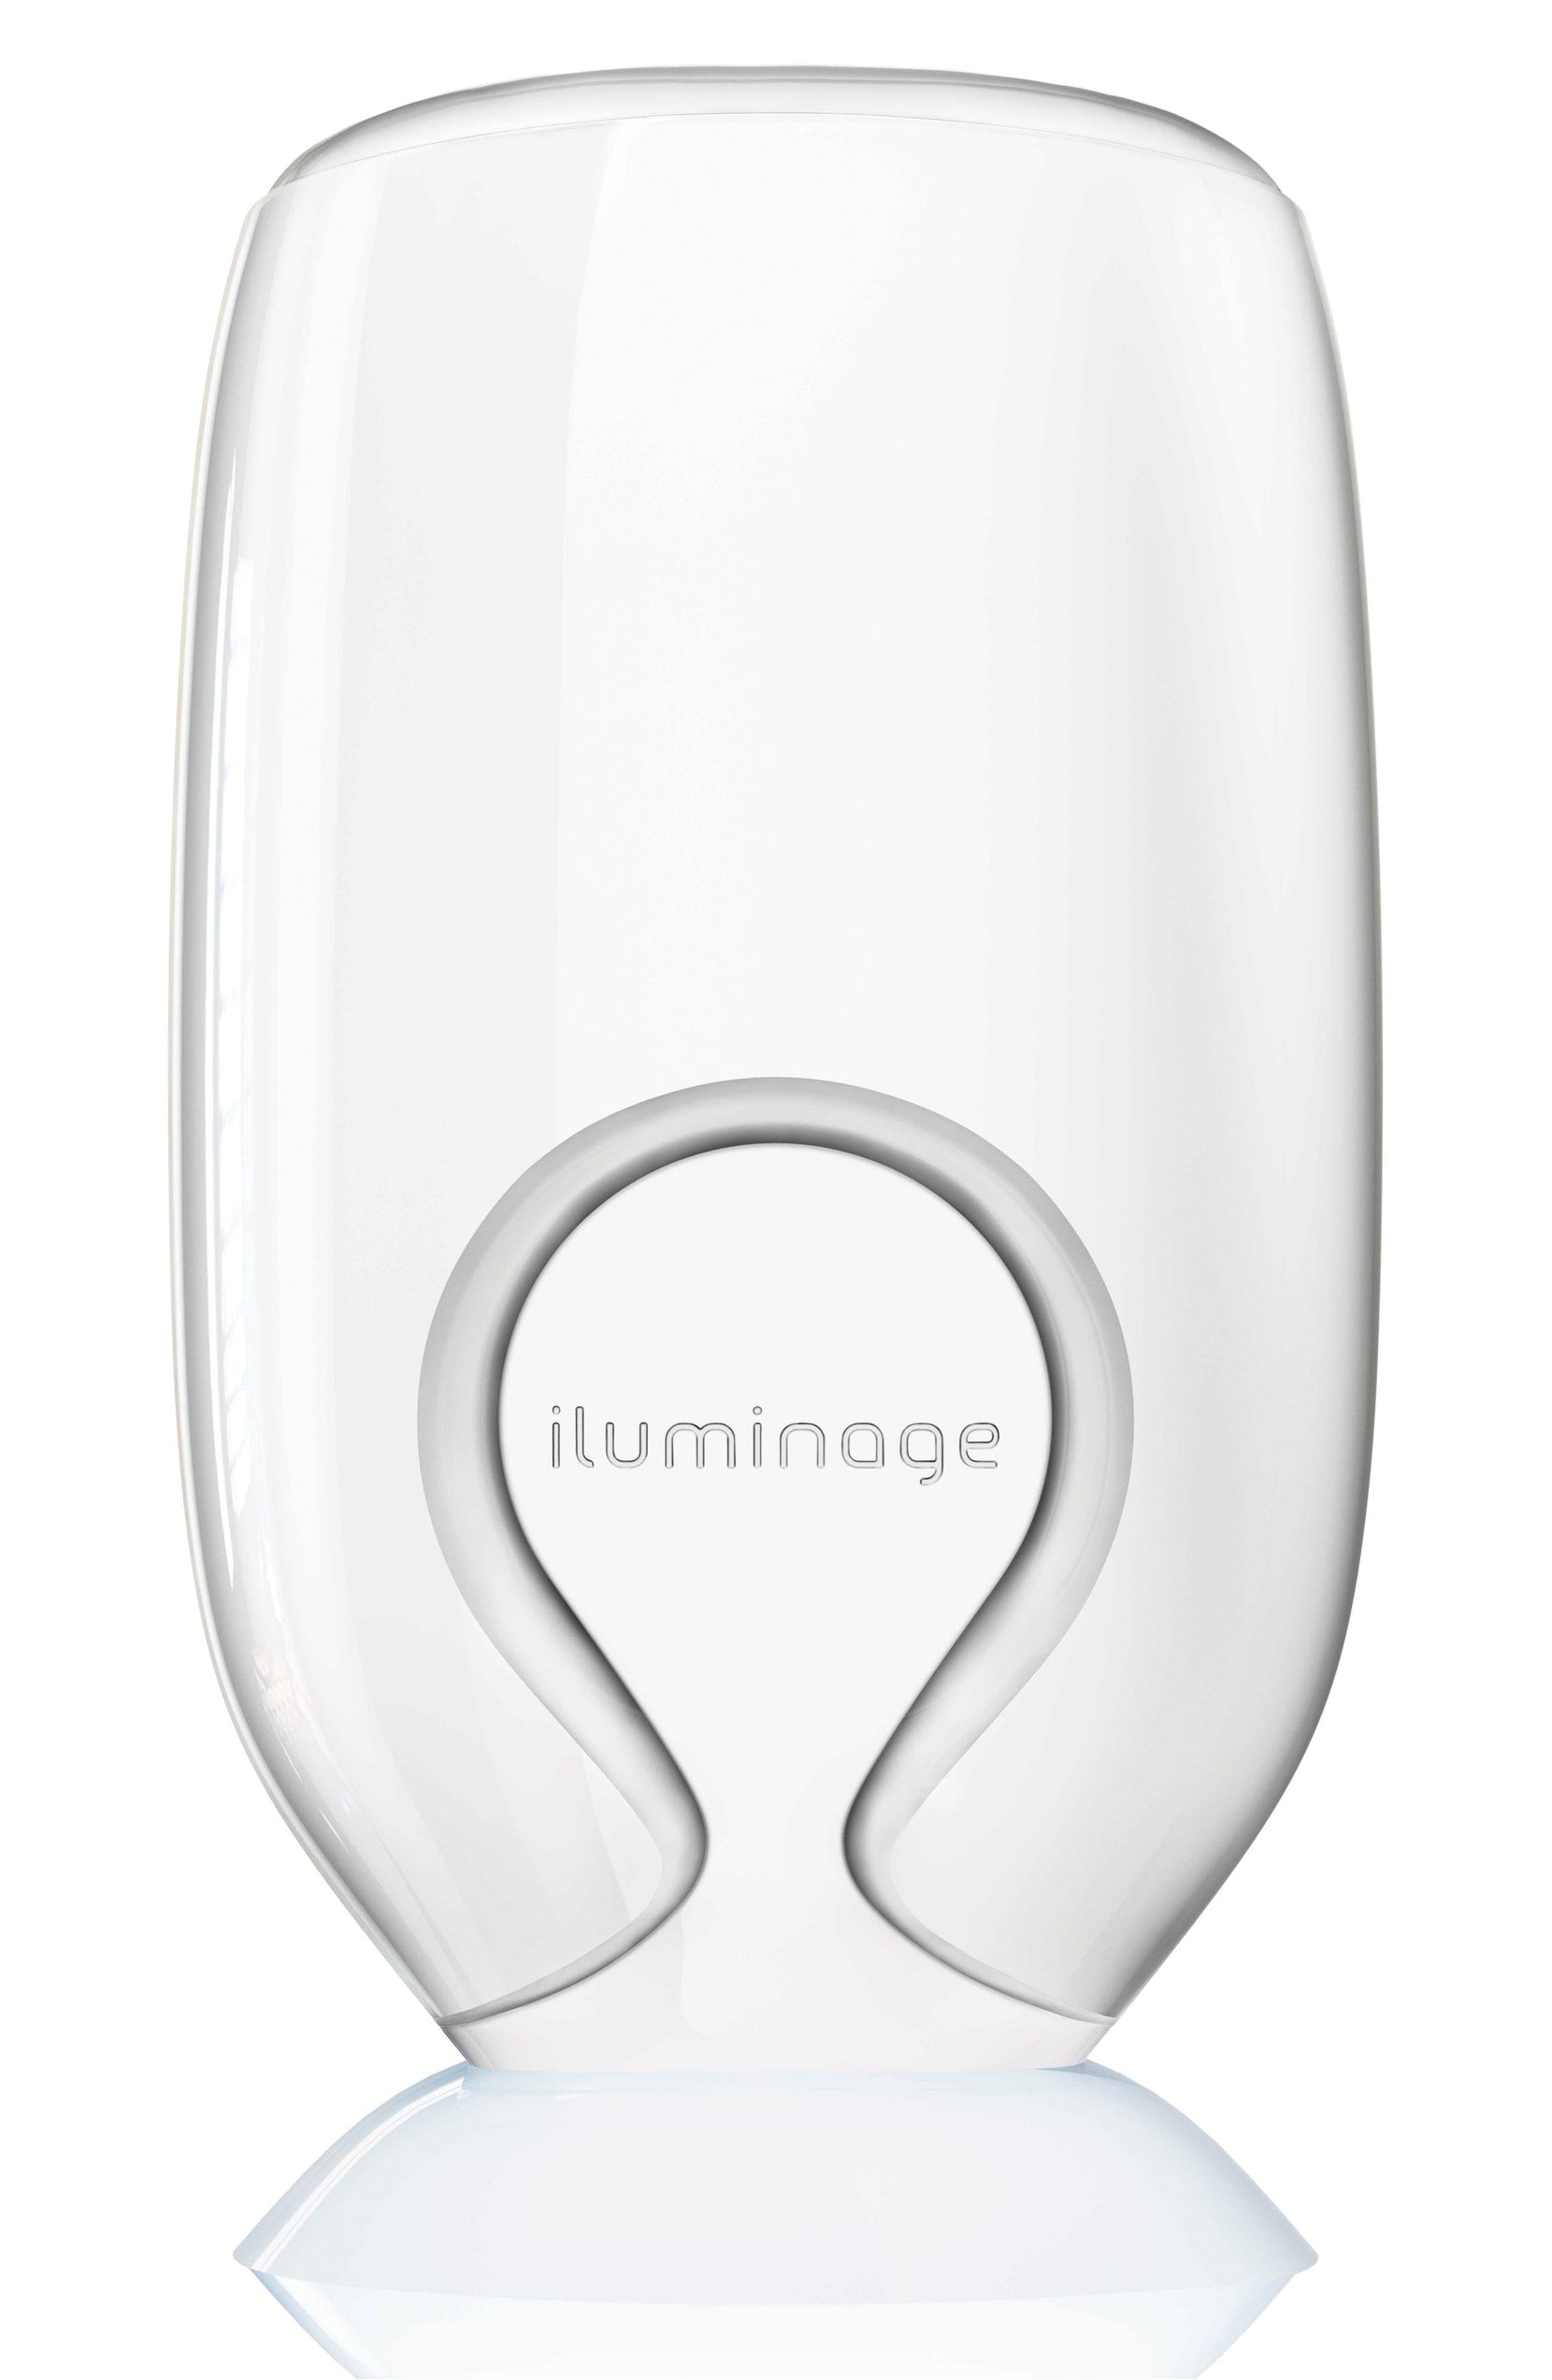 iluminage Precise Touch Permanent Hair Reduction System (FDA-Cleared) - Compact Size